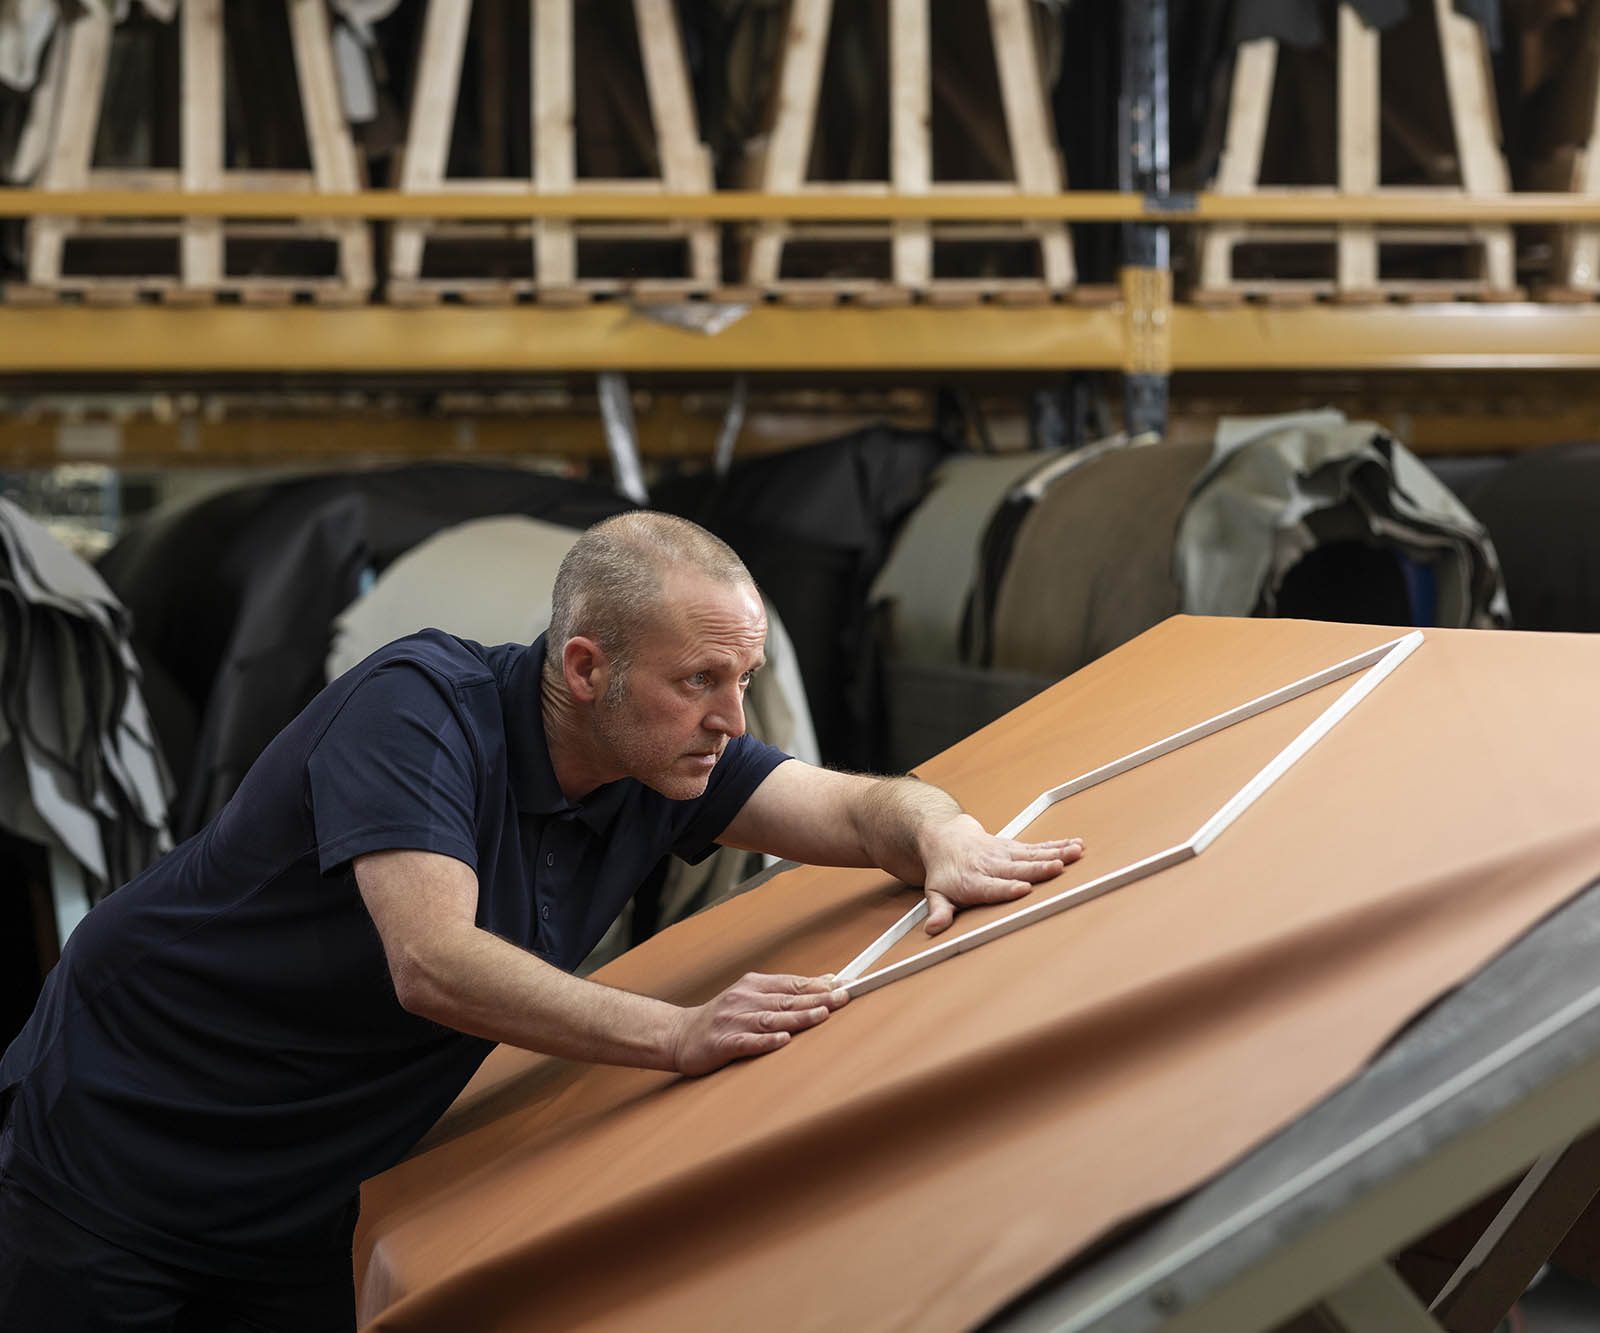 Man inspecting a leather hide